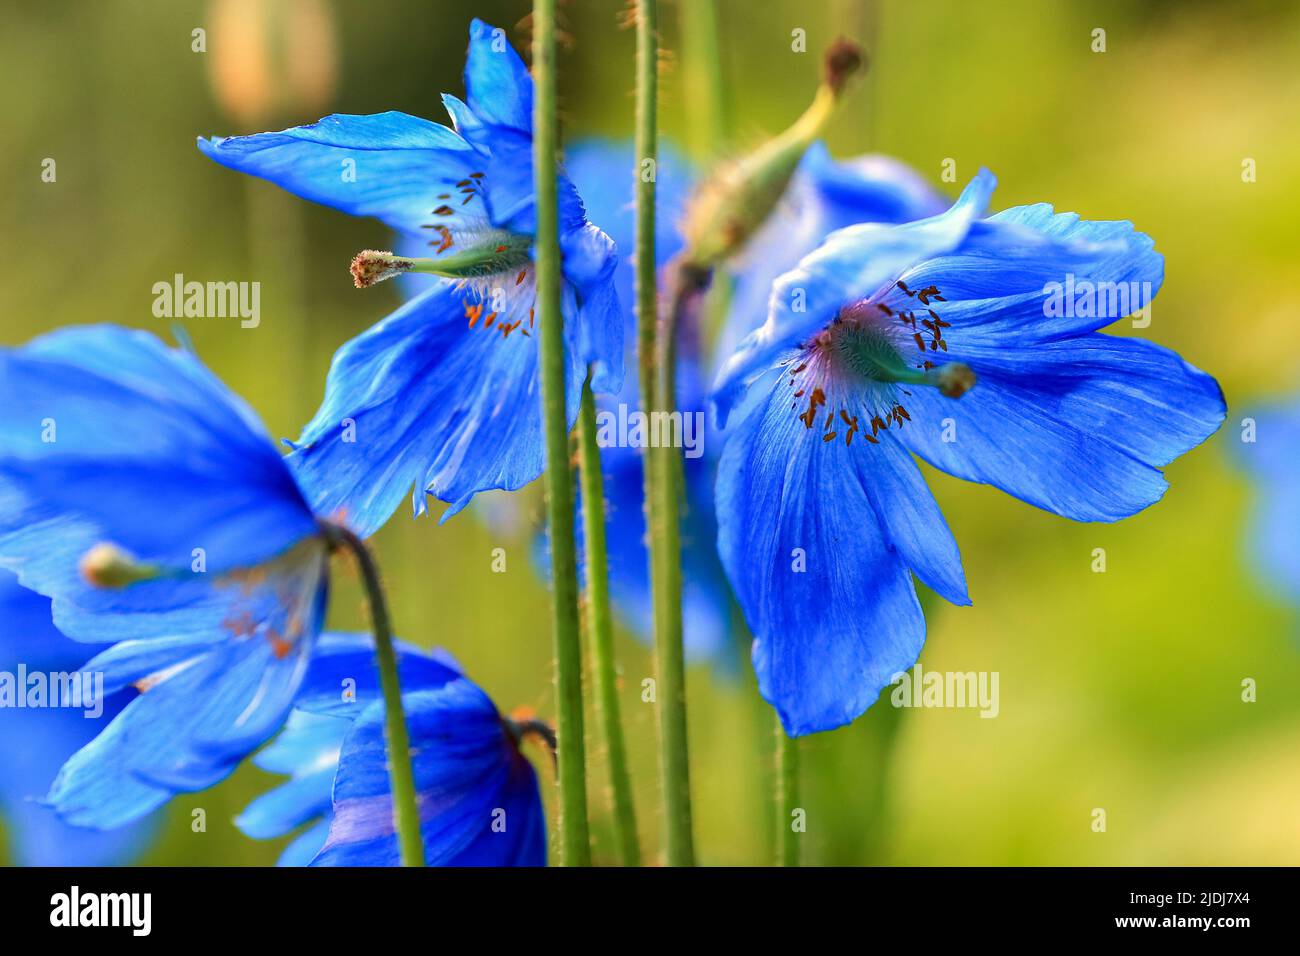 Blue blooming poppy Meconopsis grandis on the green background, closeup Stock Photo